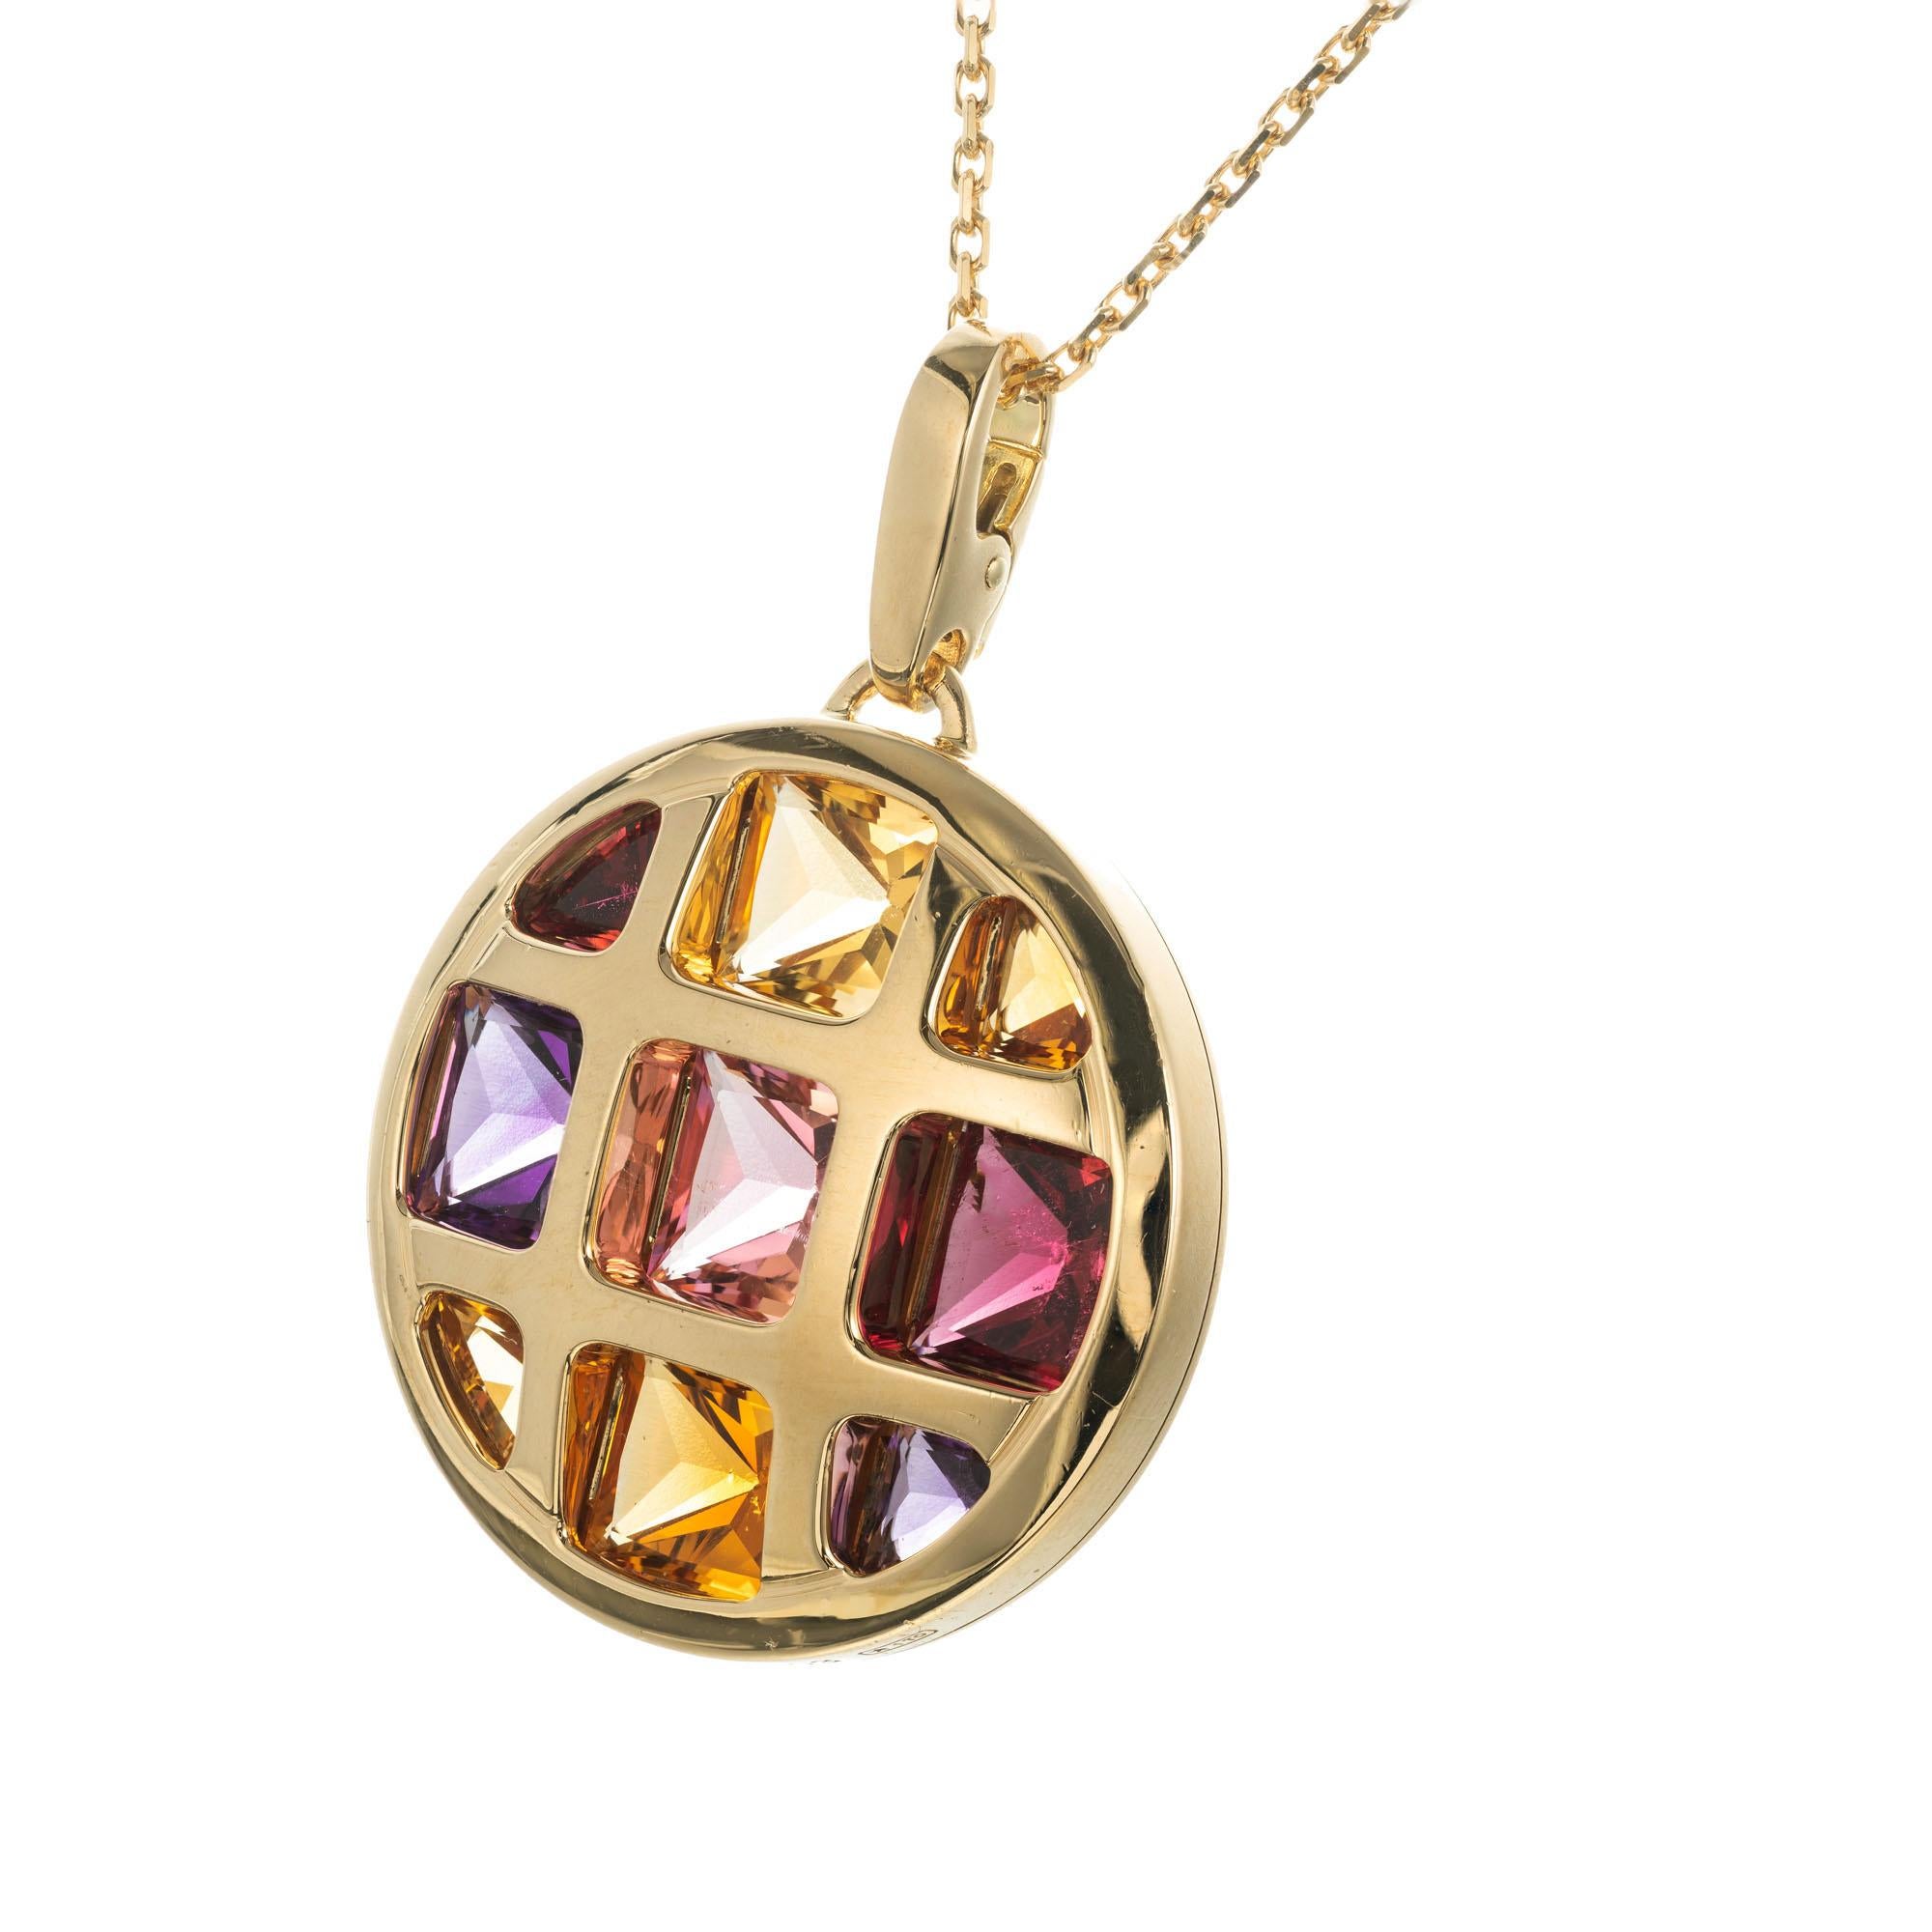 Cartier multi-gemstone pasha pendant enhancer in 18k yellow gold. 

9 Assorted multi-color custom cut gemstones 
18k yellow gold 
Stamped: Cartier 750
Hallmark: No. 7013
22.4 grams
Top to bottom: 39.63mm or 1.56 Inches
Width: 26.93mm or 1.06